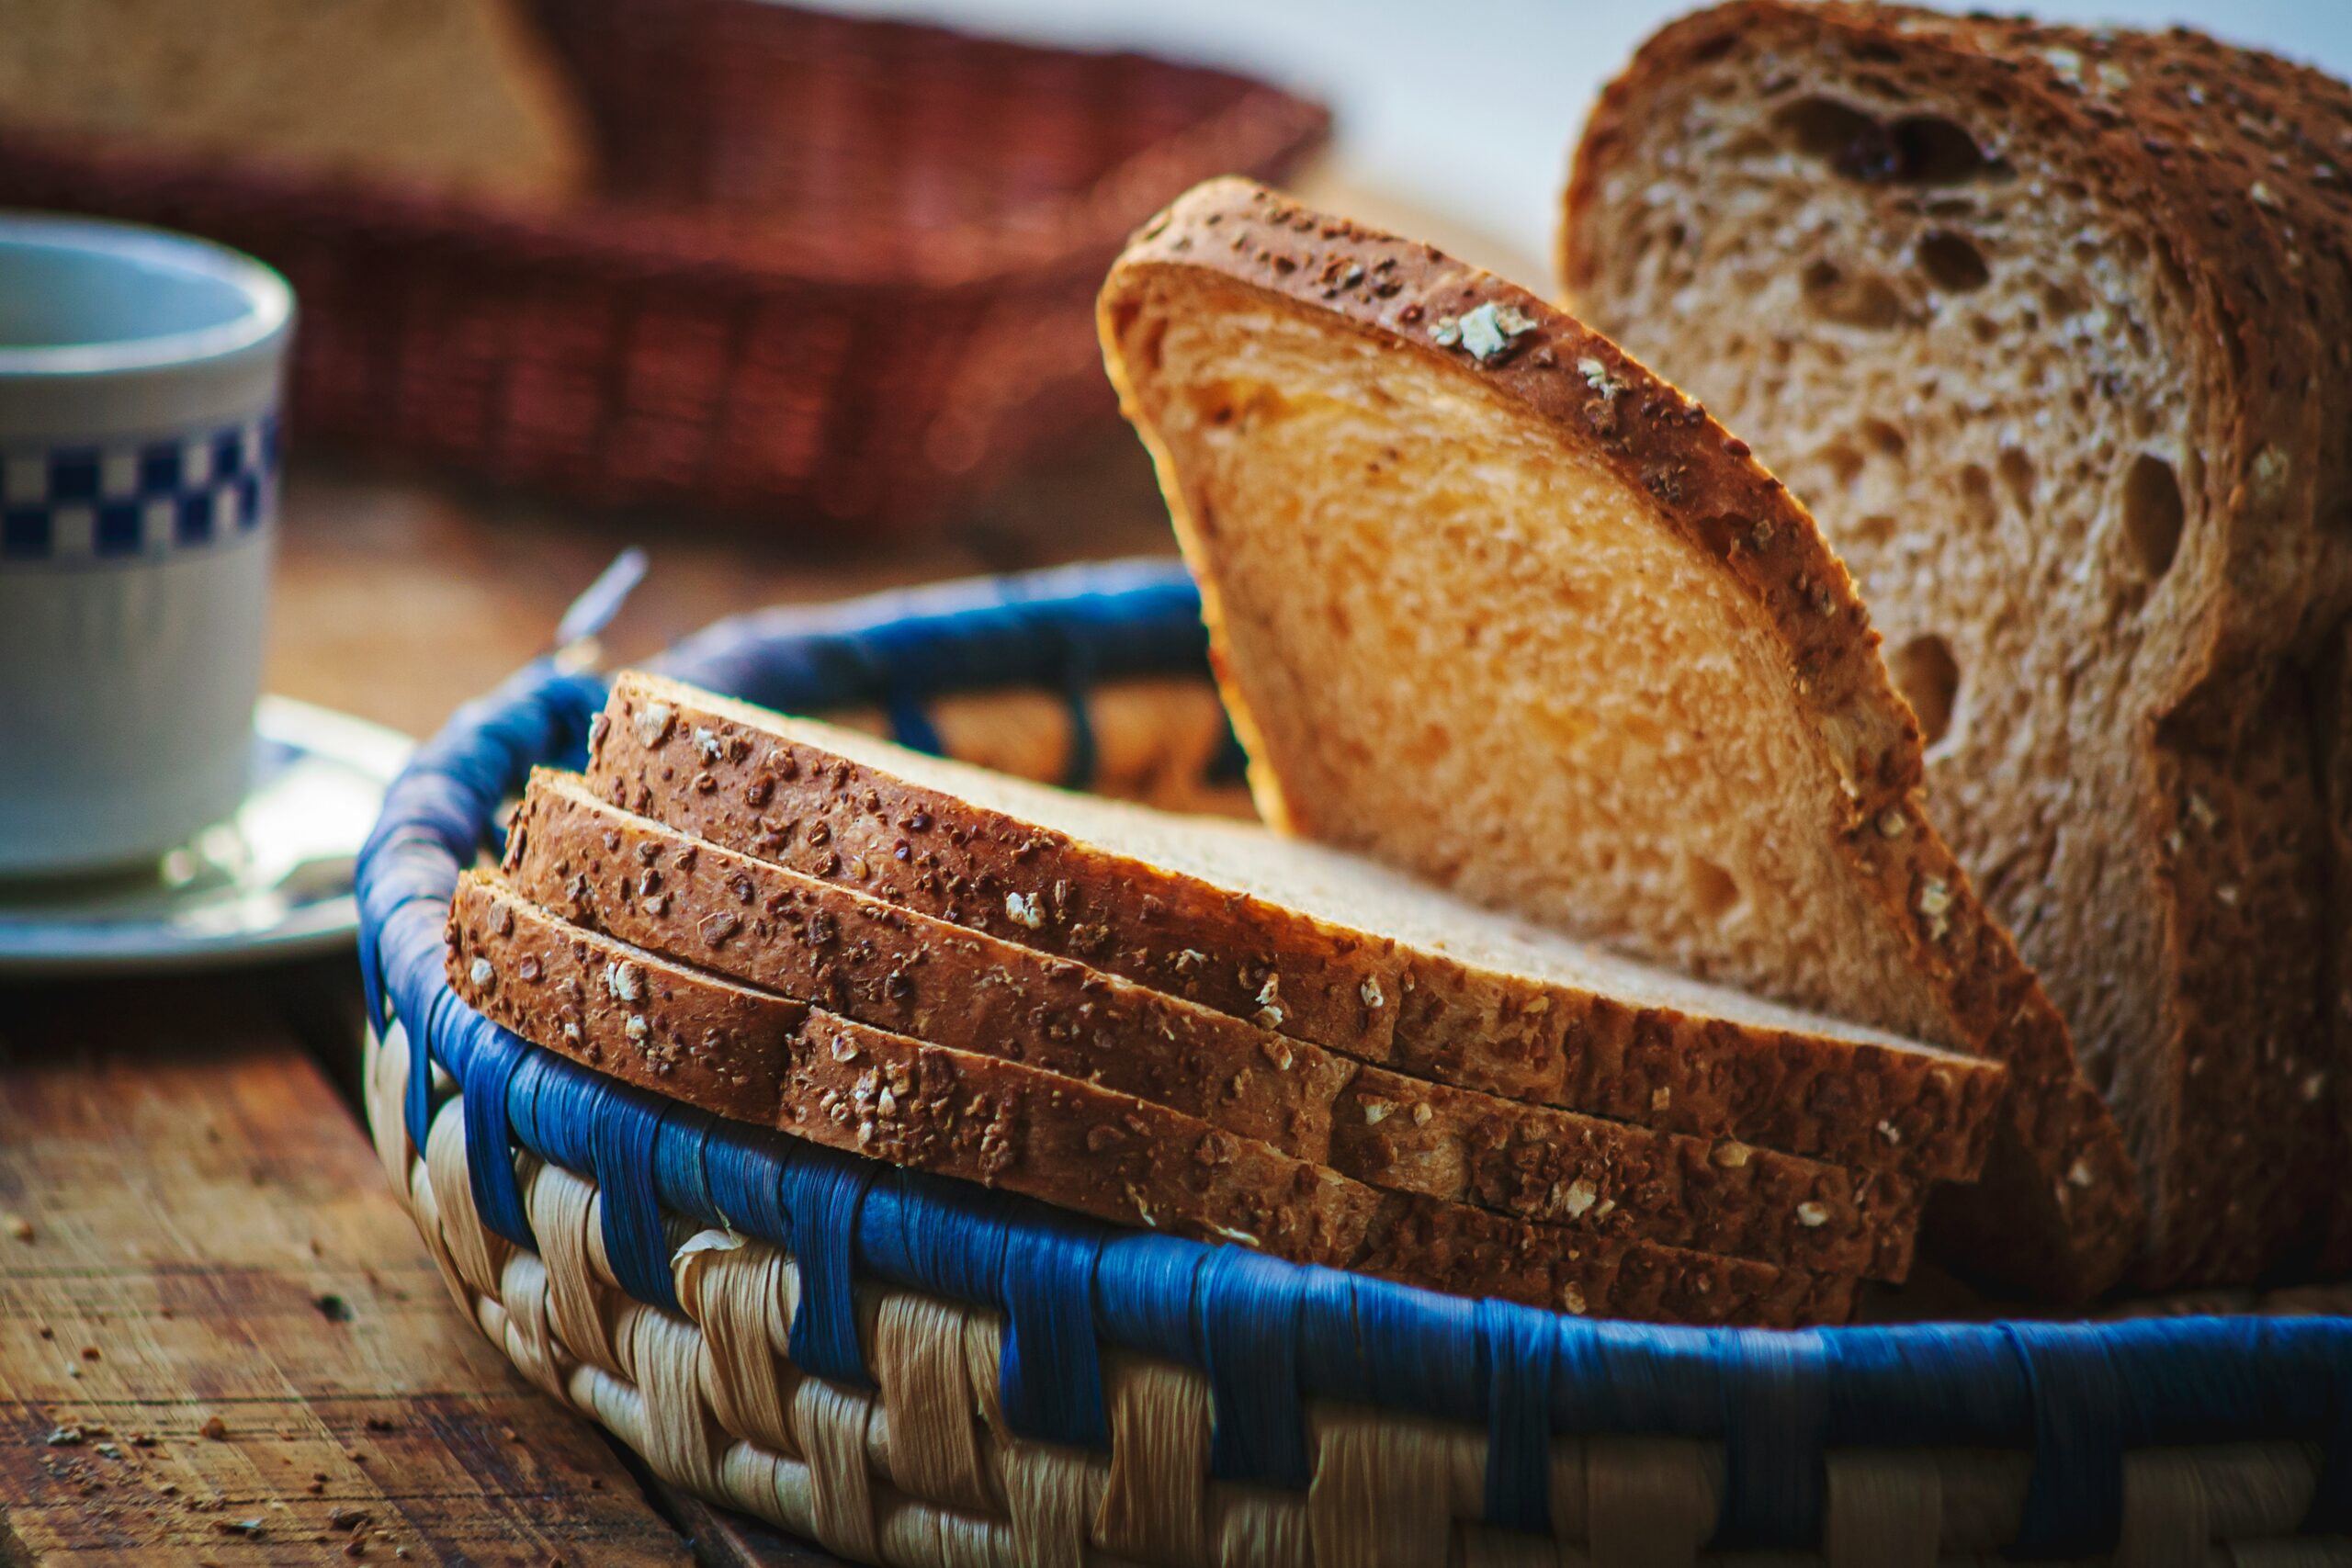 a close up of bread in a basket with a cup of coffee